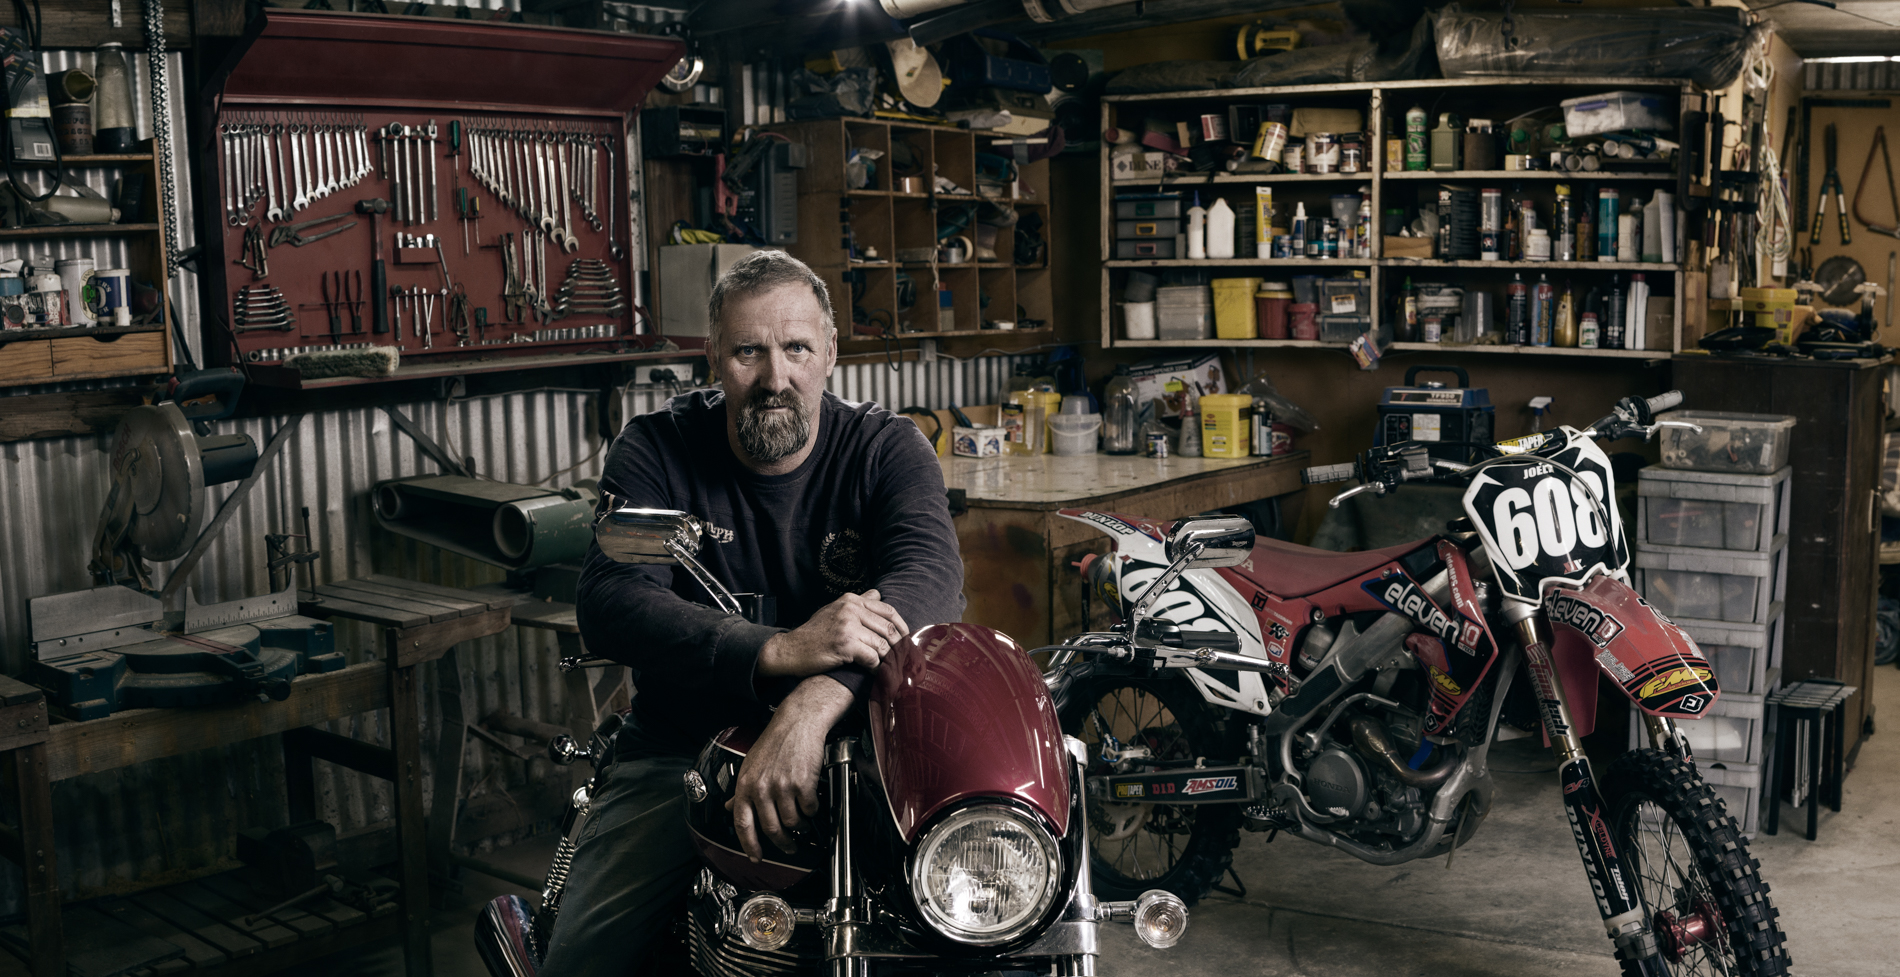 Dale general shedder and his Triumph motorcycle environmental portrait